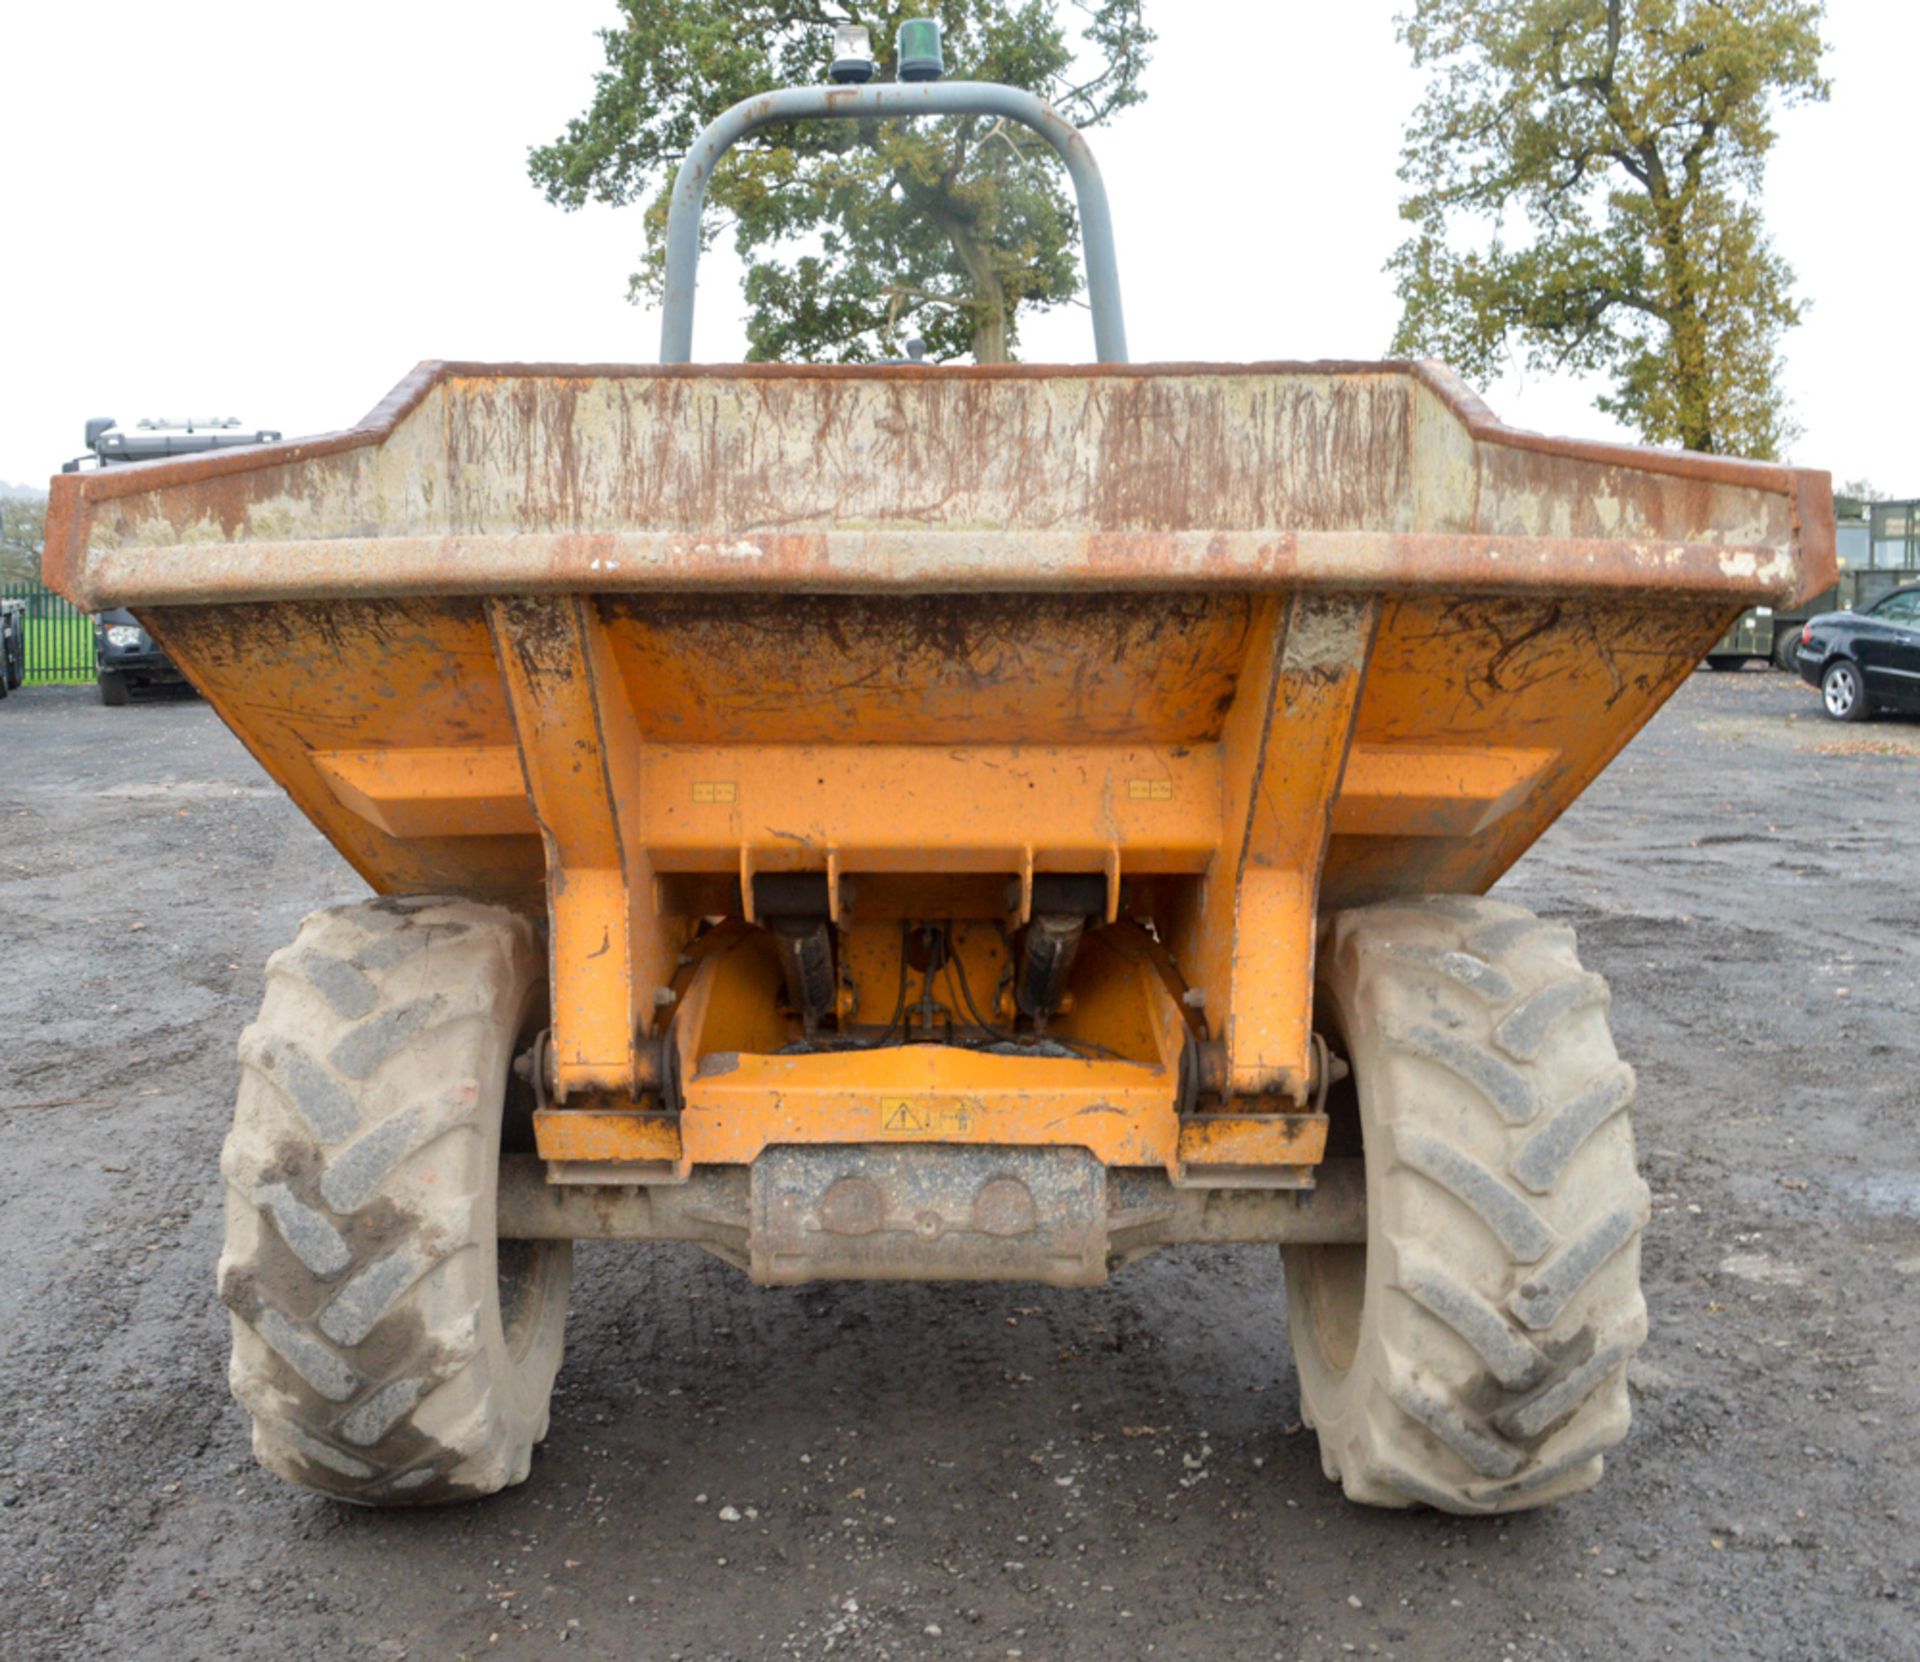 Benford Terex 6 tonne straight skip dumper Year: 2003 S/N: E303EE116 Recorded Hours: Not - Image 5 of 11